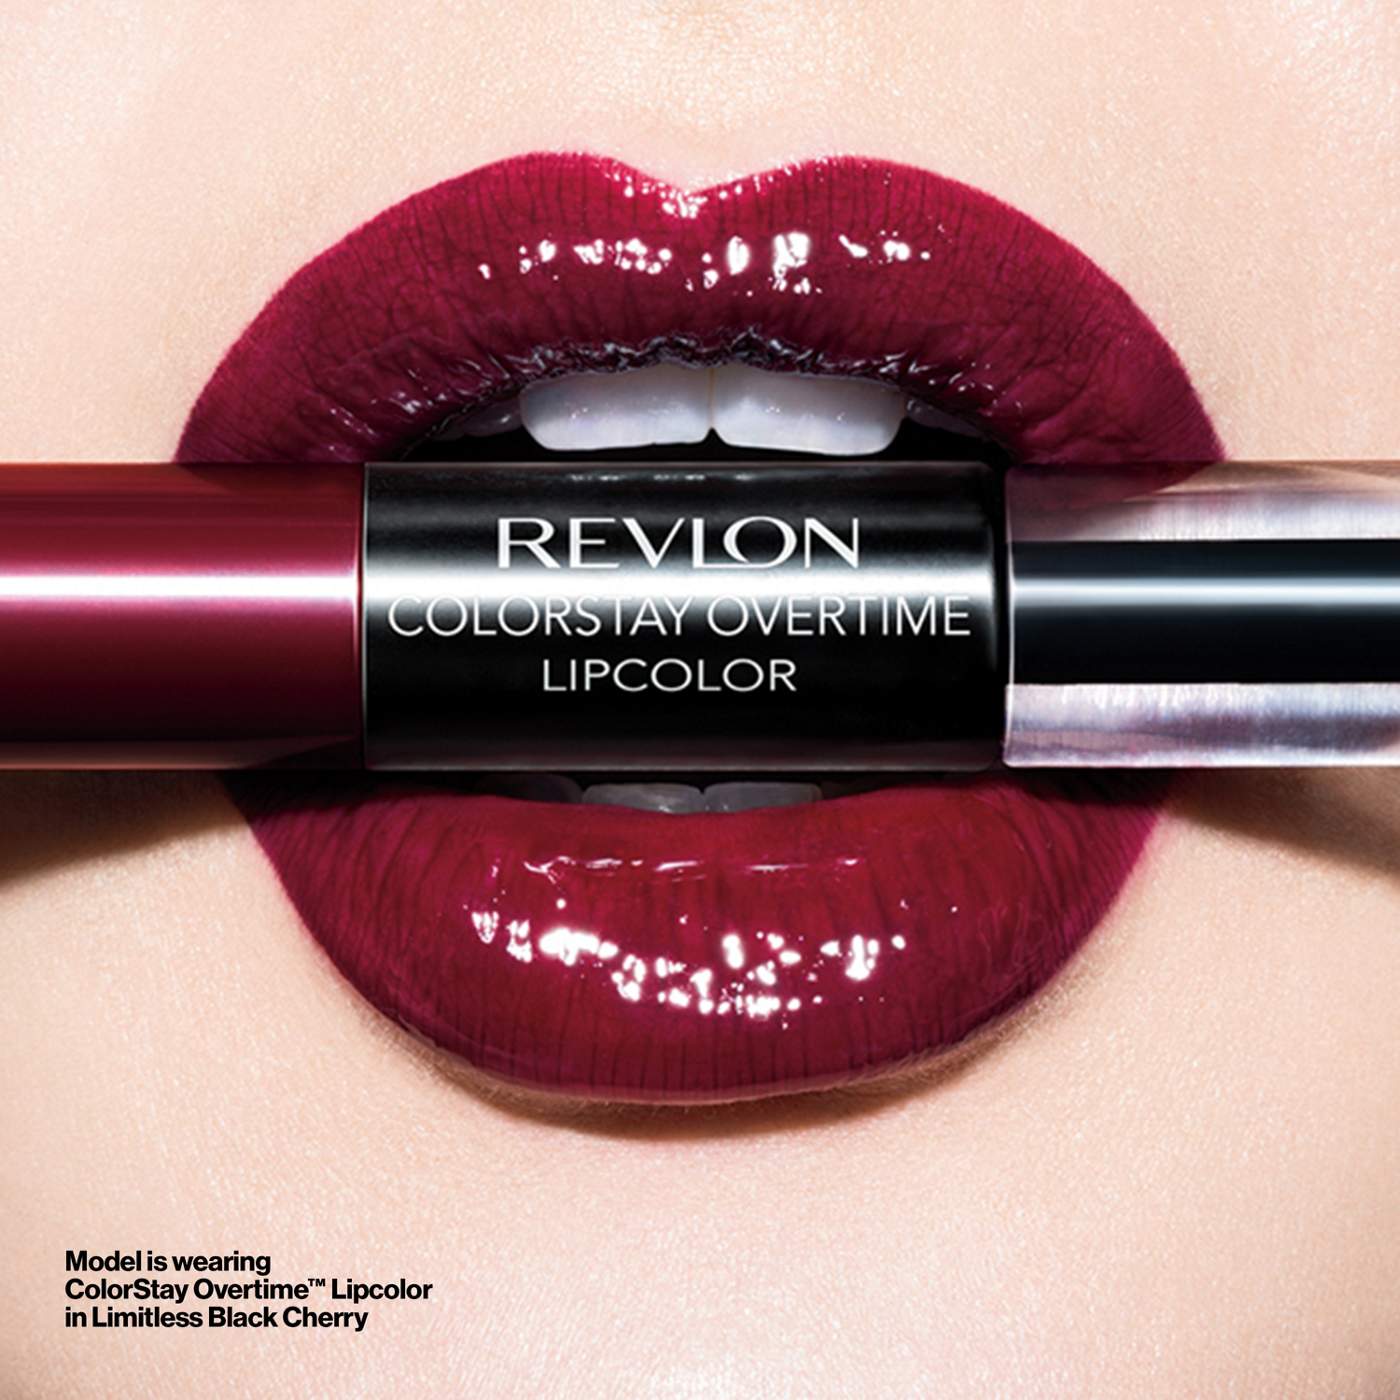 Revlon ColorStay Overtime Lipcolor - 010 Non-Stop Cherry; image 6 of 8